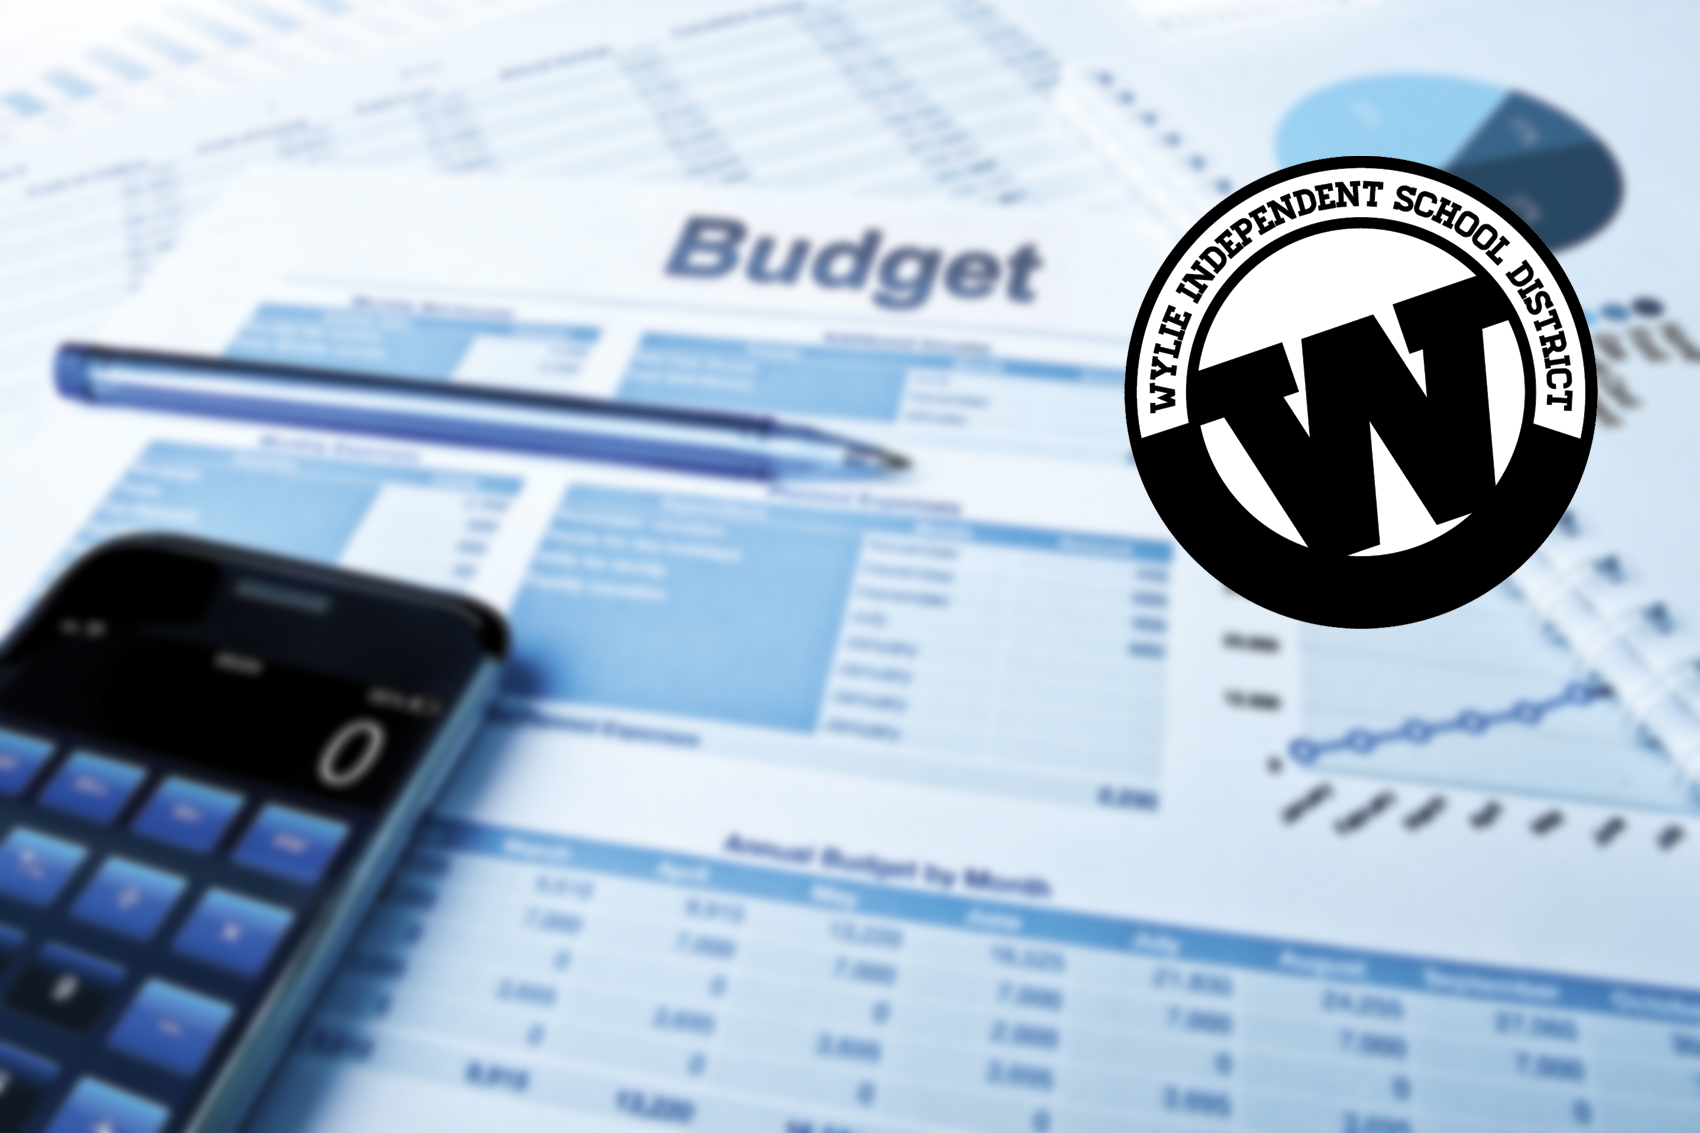 WISD budget adopted